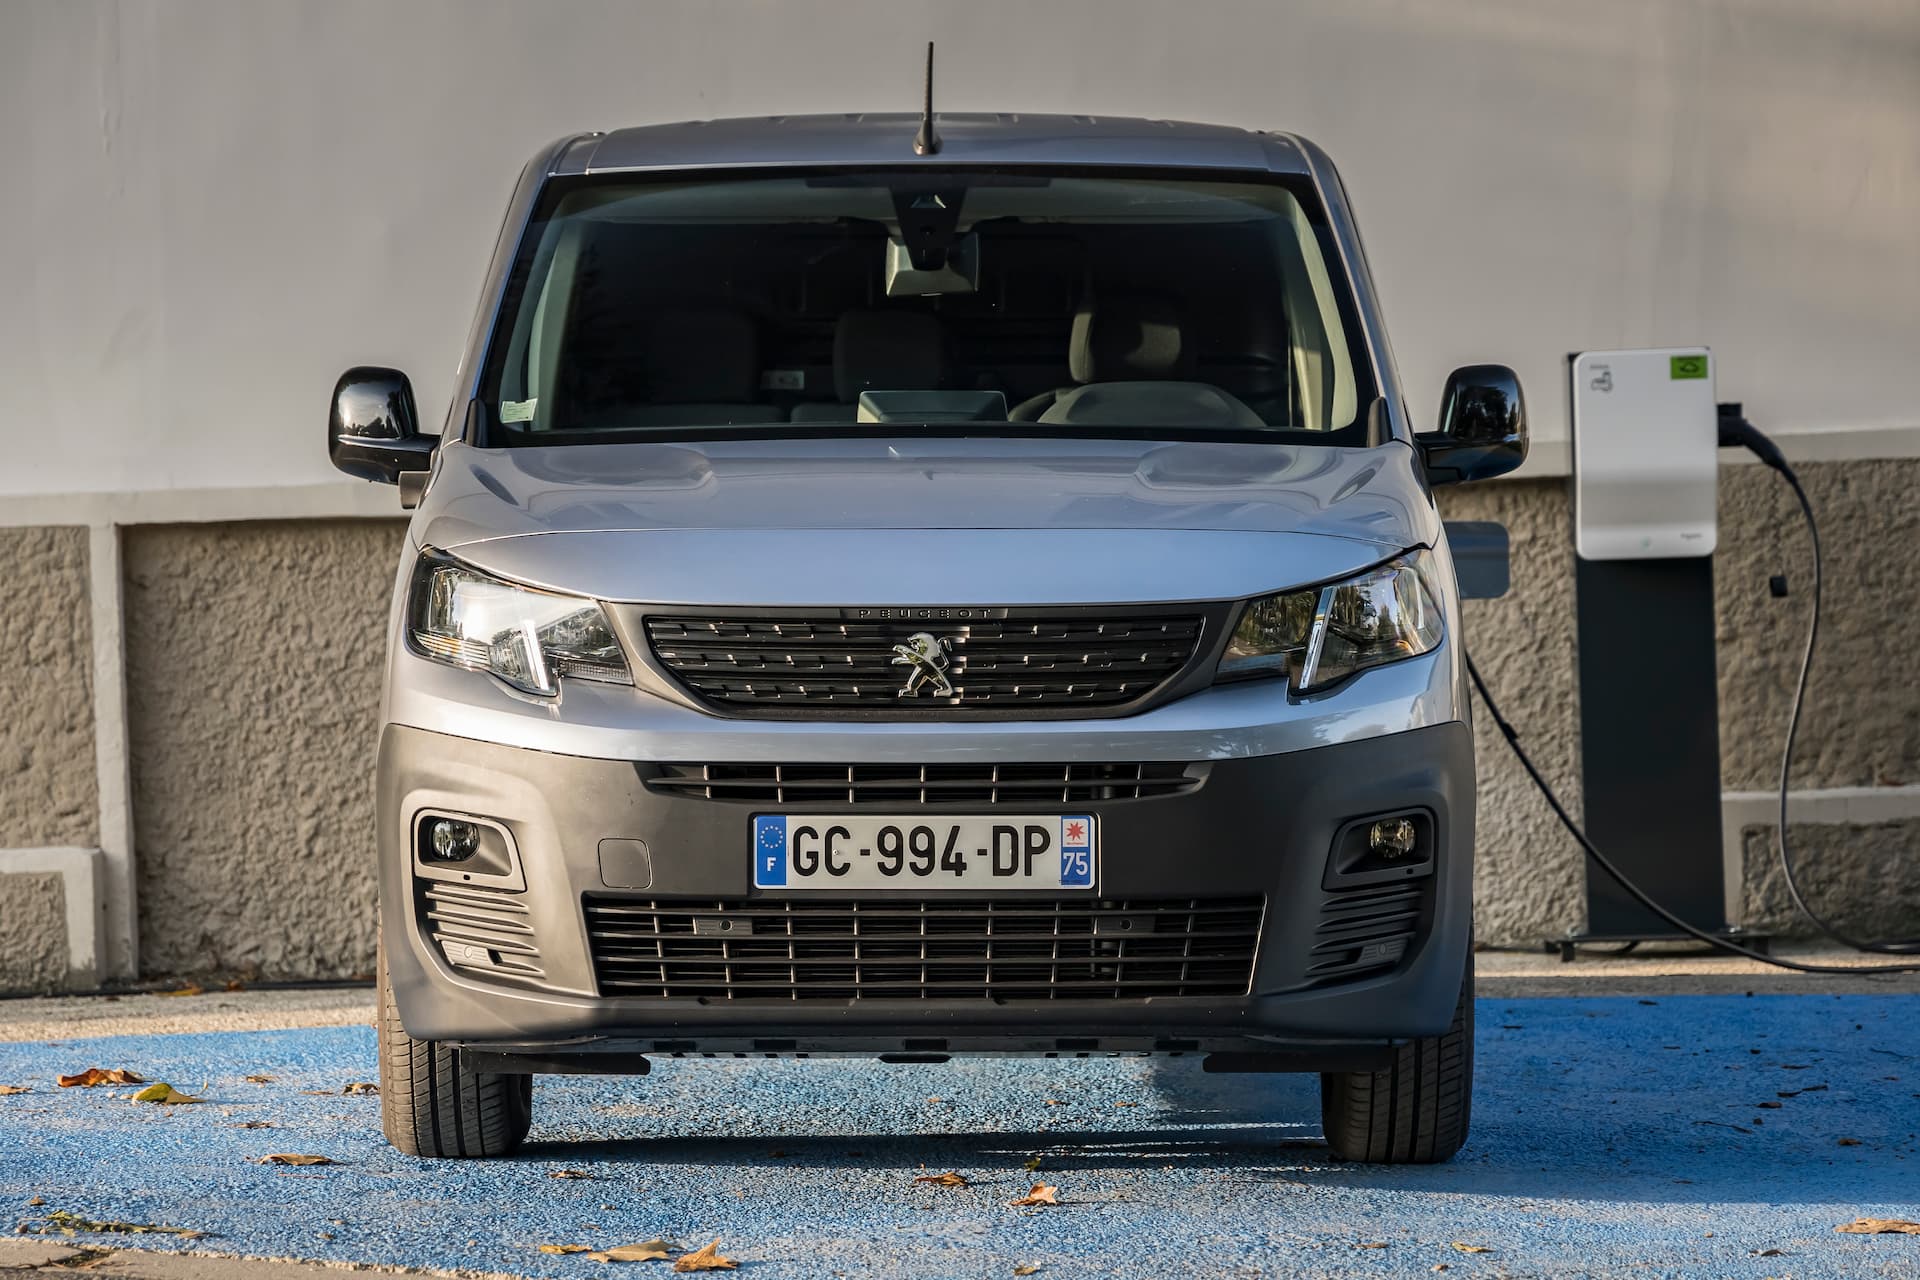 Peugeot e-Partner van charging from AC charger front view